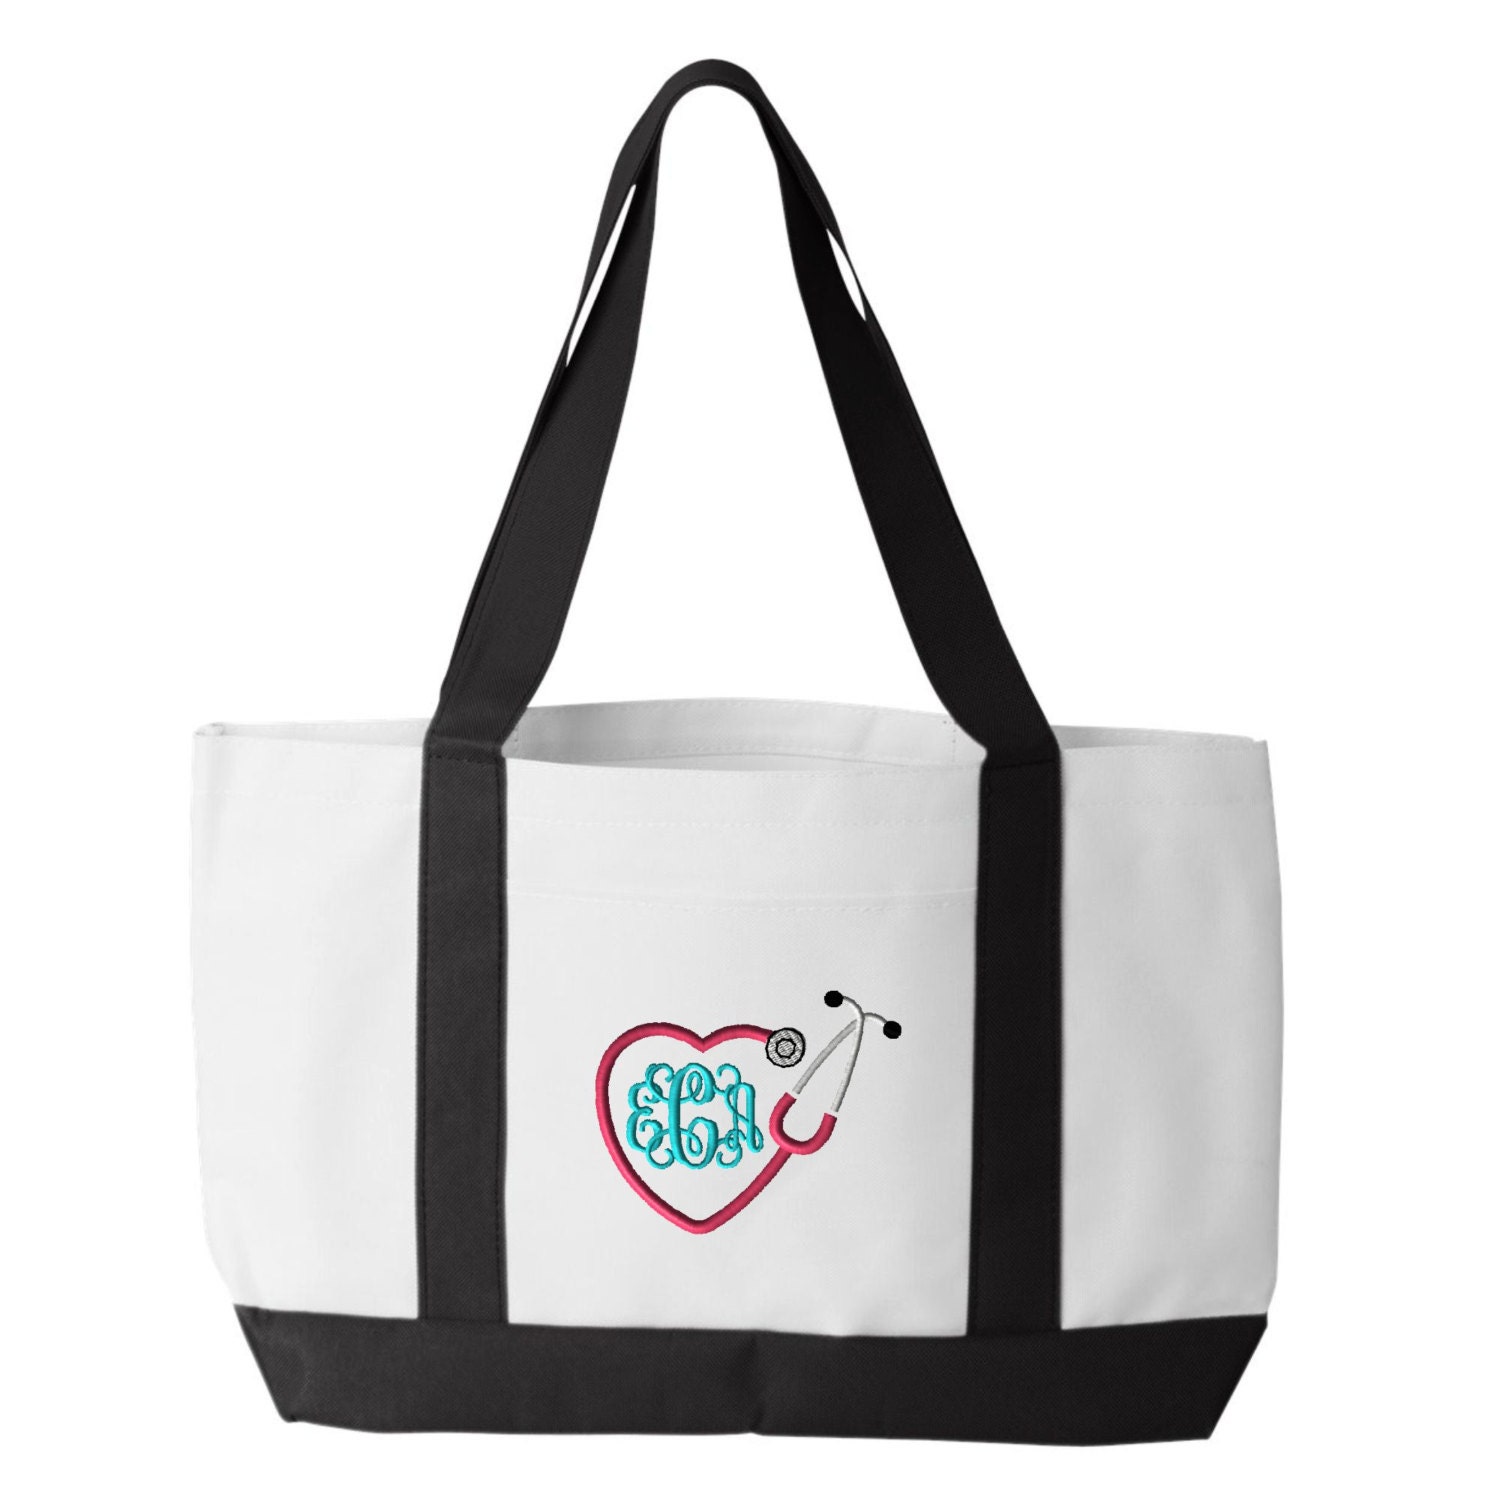 Heart Stethoscope Nurse Tote Bag Monogrammed. Embroidered